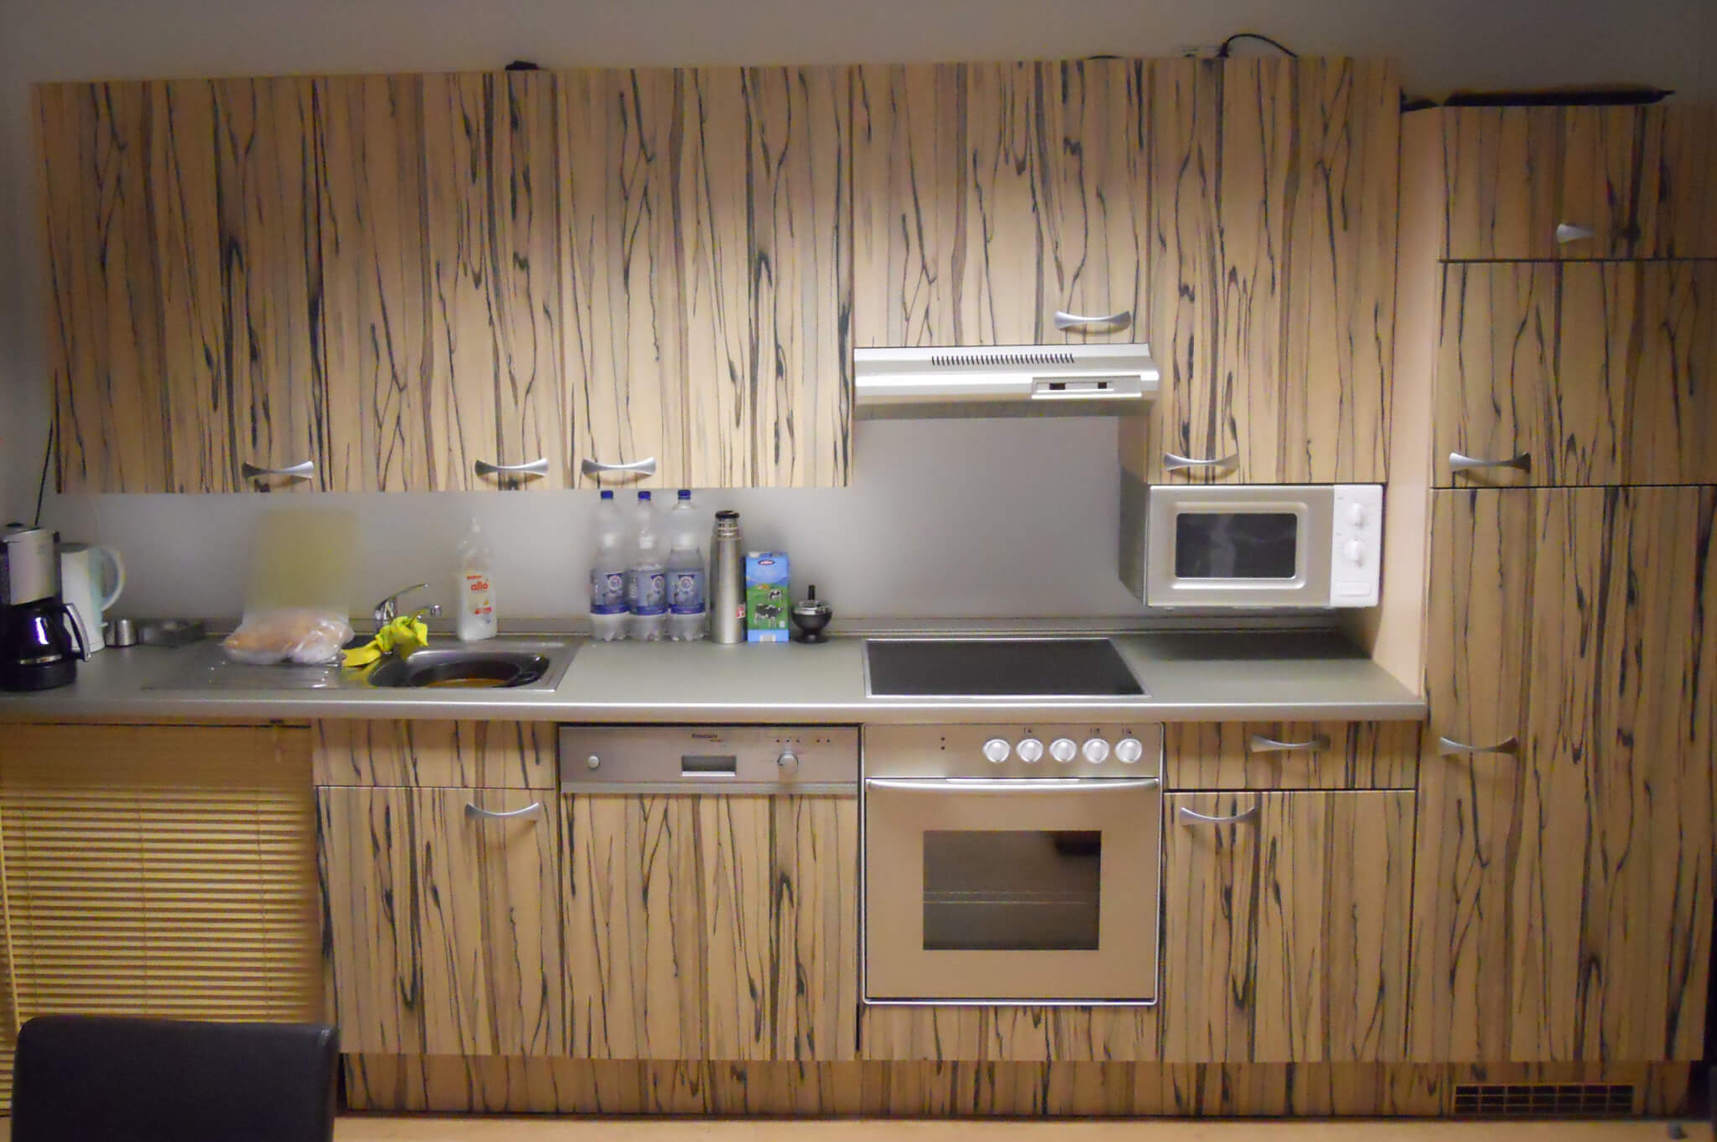 resimdo film kitchen kitchen counter after wood example